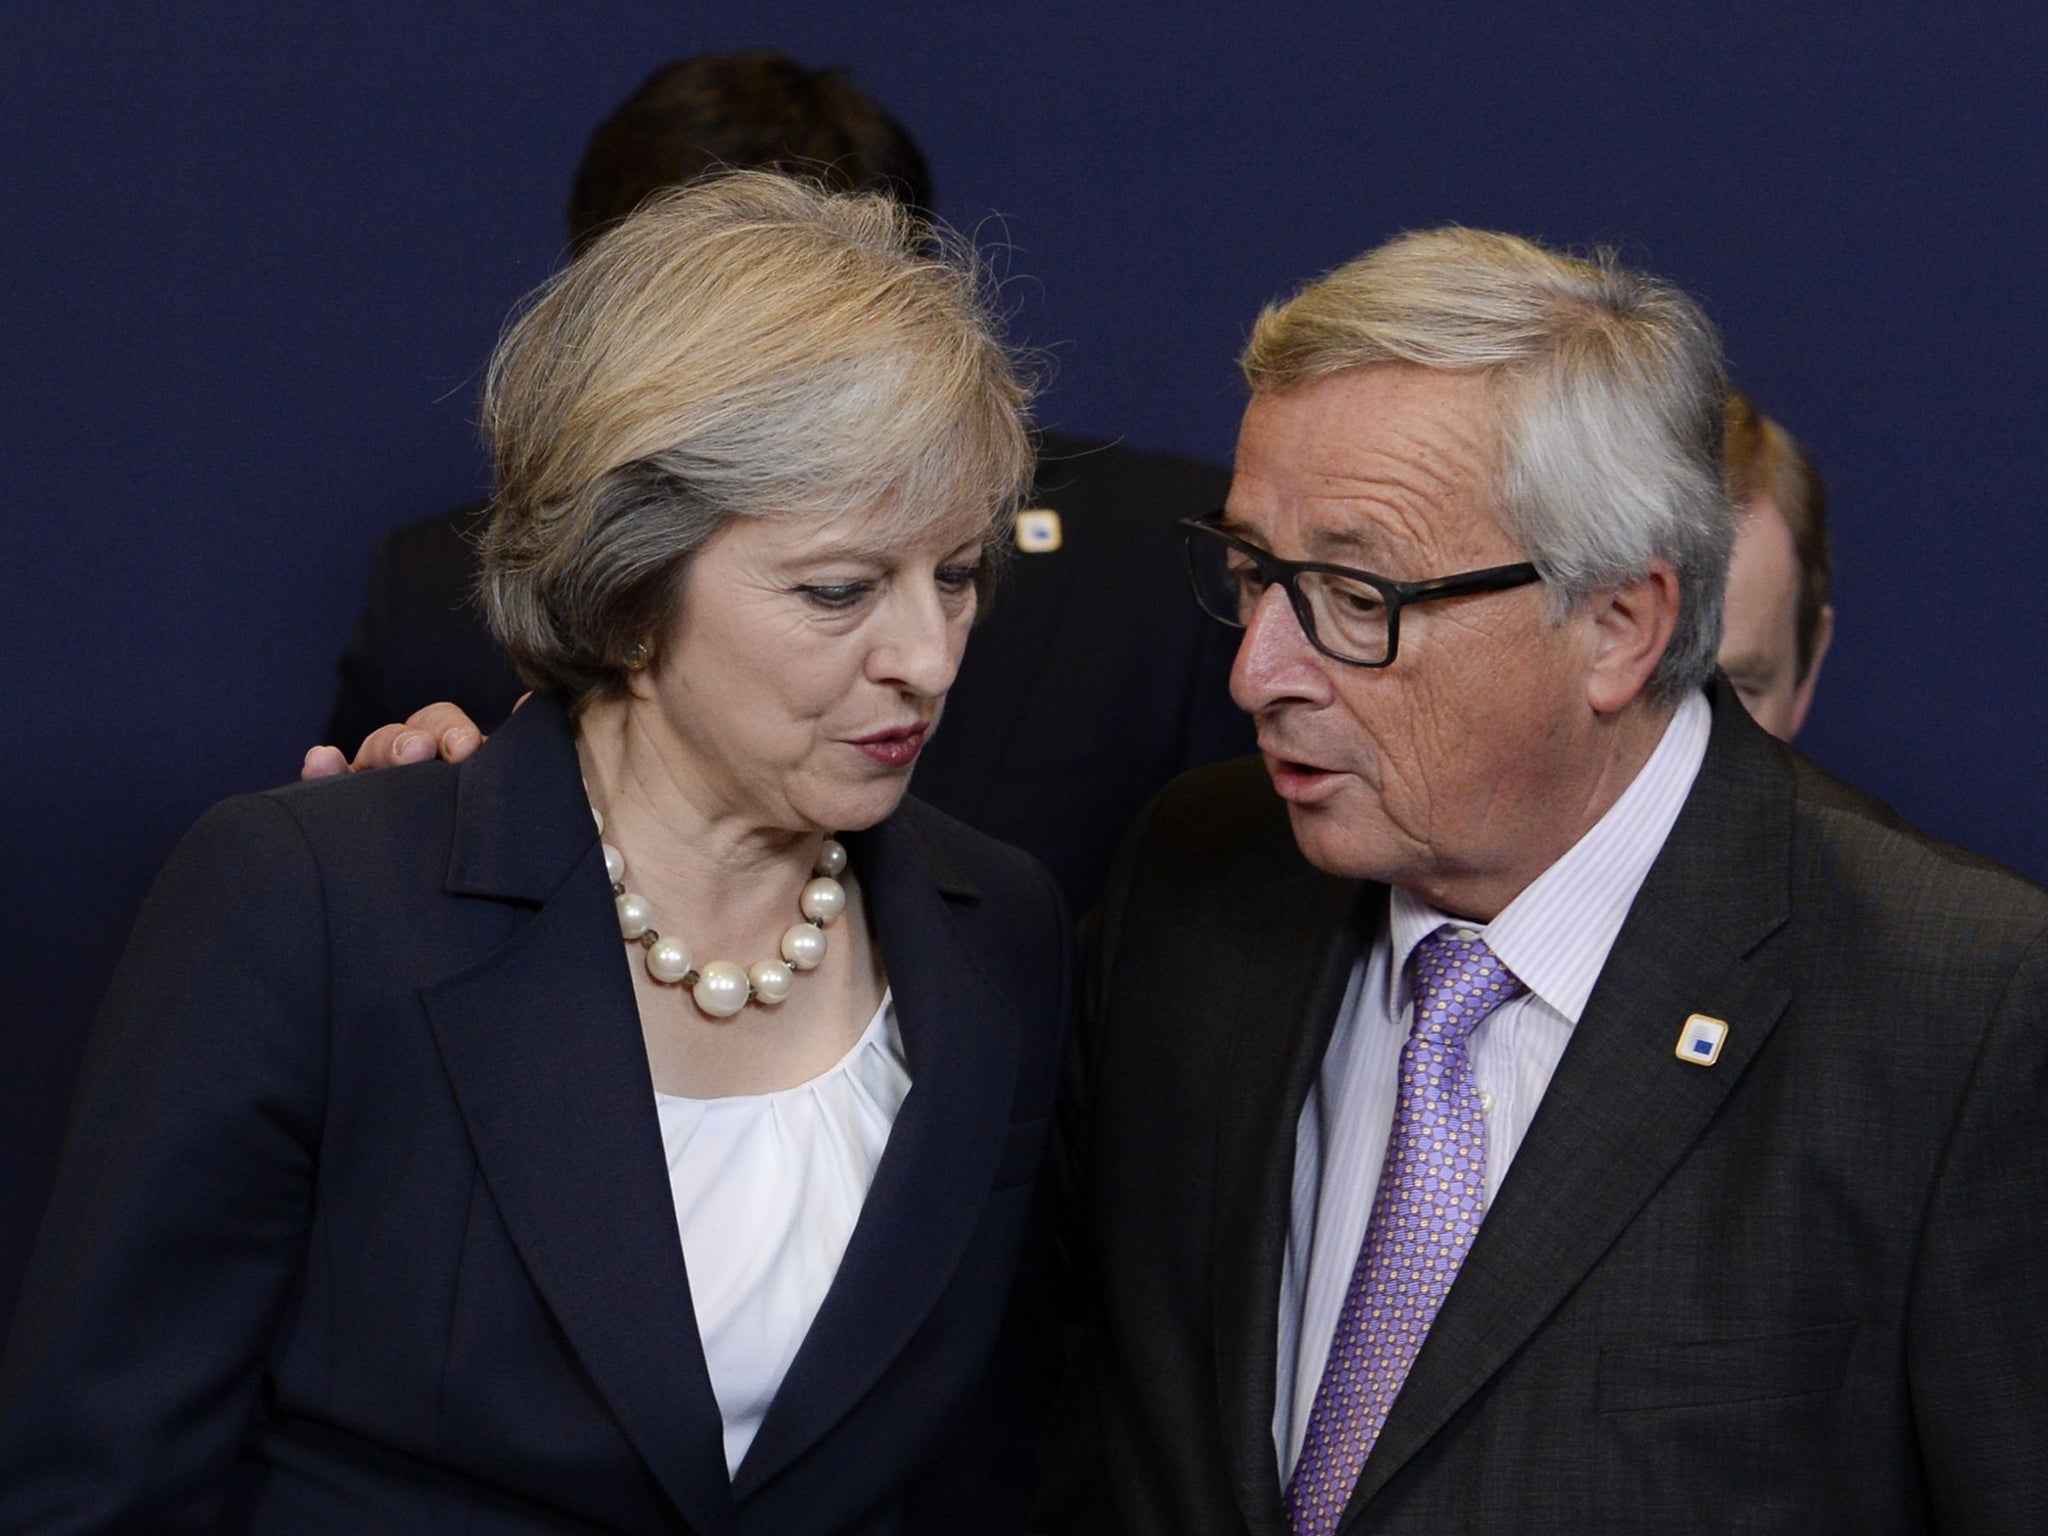 The Prime Minister held talks with European Commission head Jean-Claude Juncker to discuss future relations between Britain and the EU